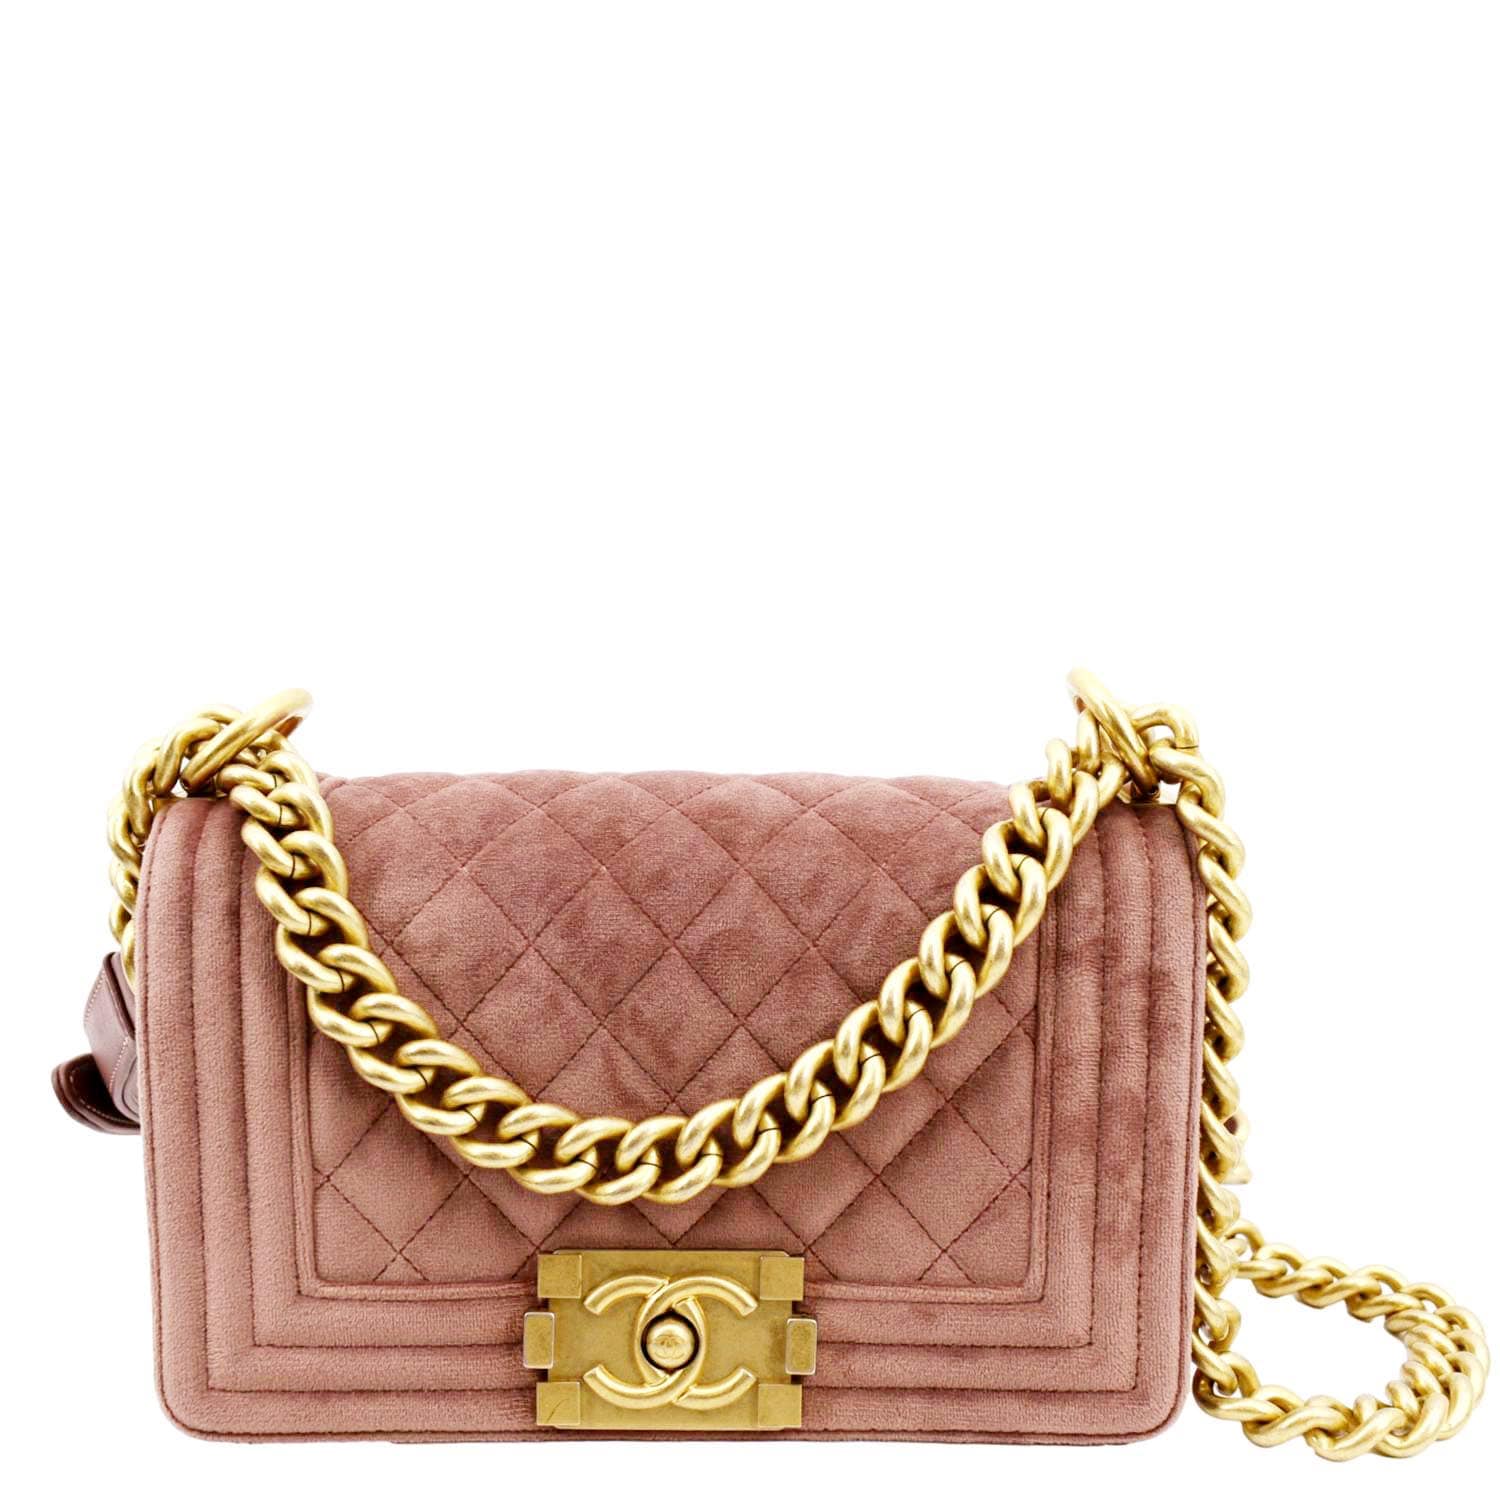 Chanel Yellow Quilted Velvet Mini Classic Flap Shoulder Bag